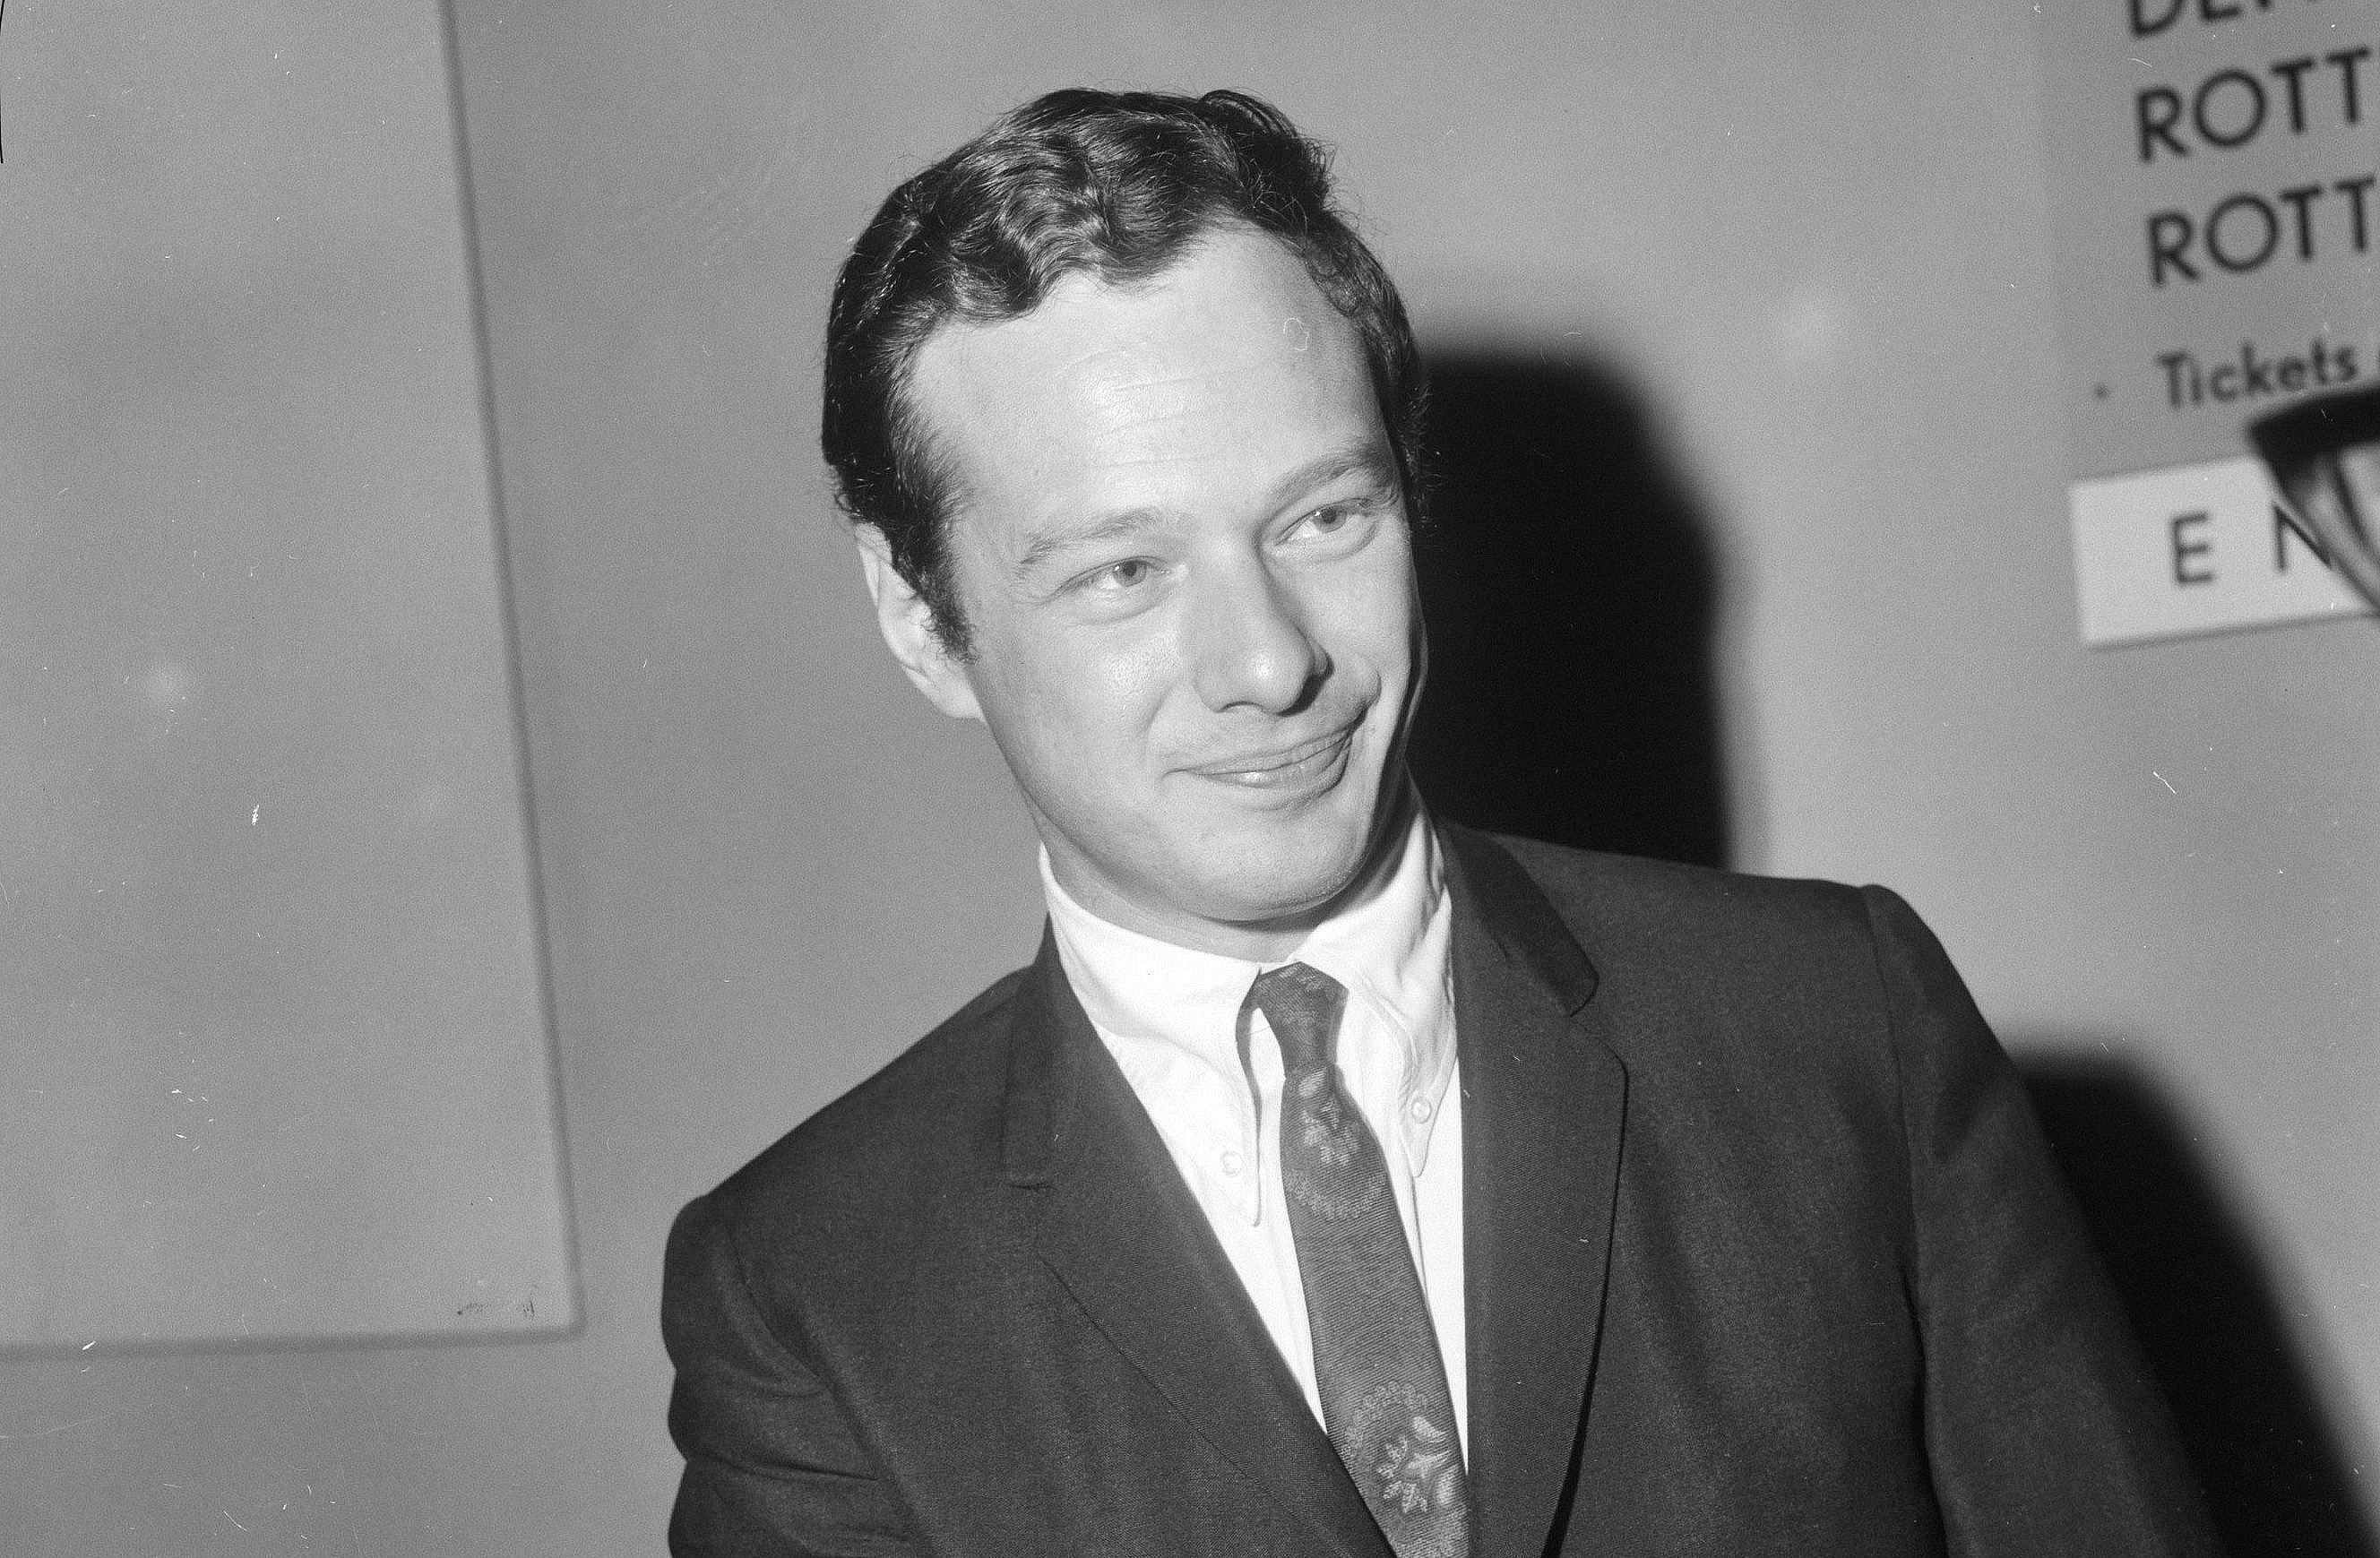 Fundraiser launched to honour ‘fifth Beatle’ Brian Epstein with 7ft statue